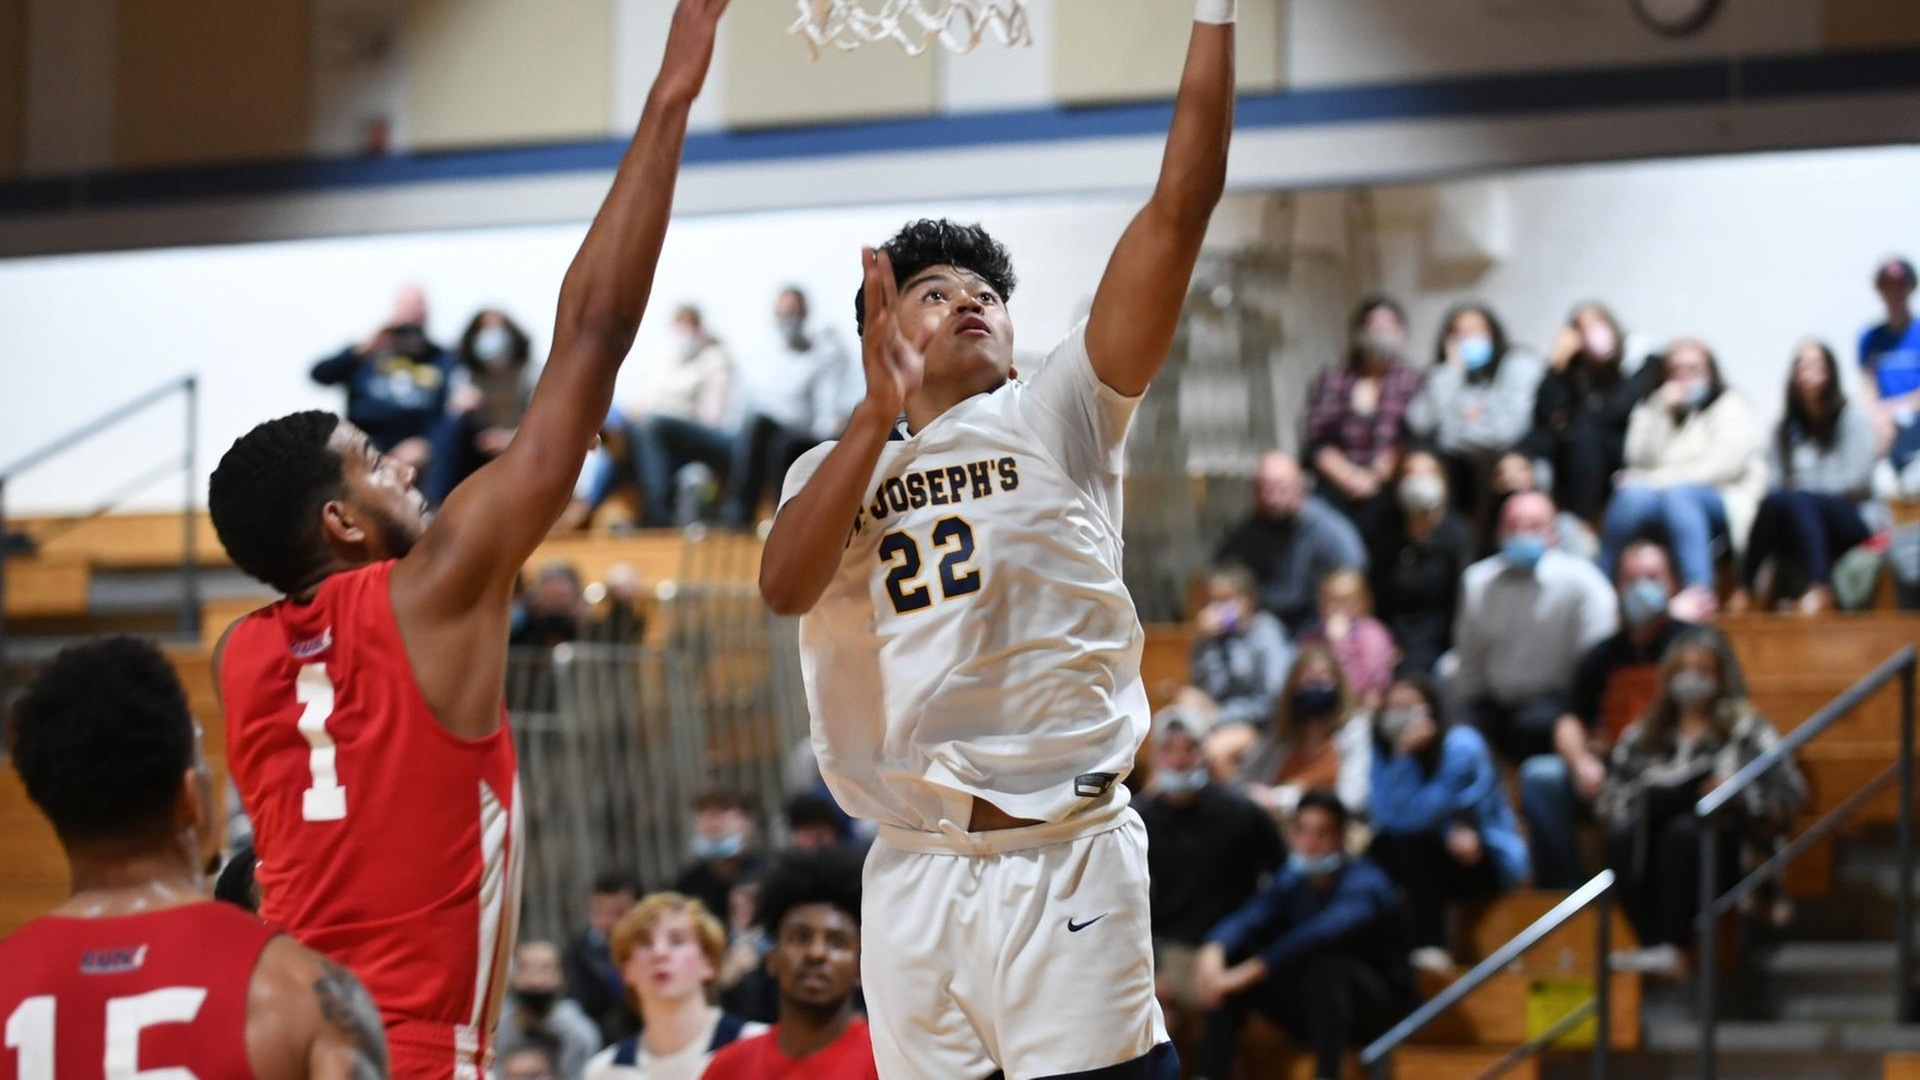 Men's Hoops Snaps Skid with 71-49 Win Over Farmingdale